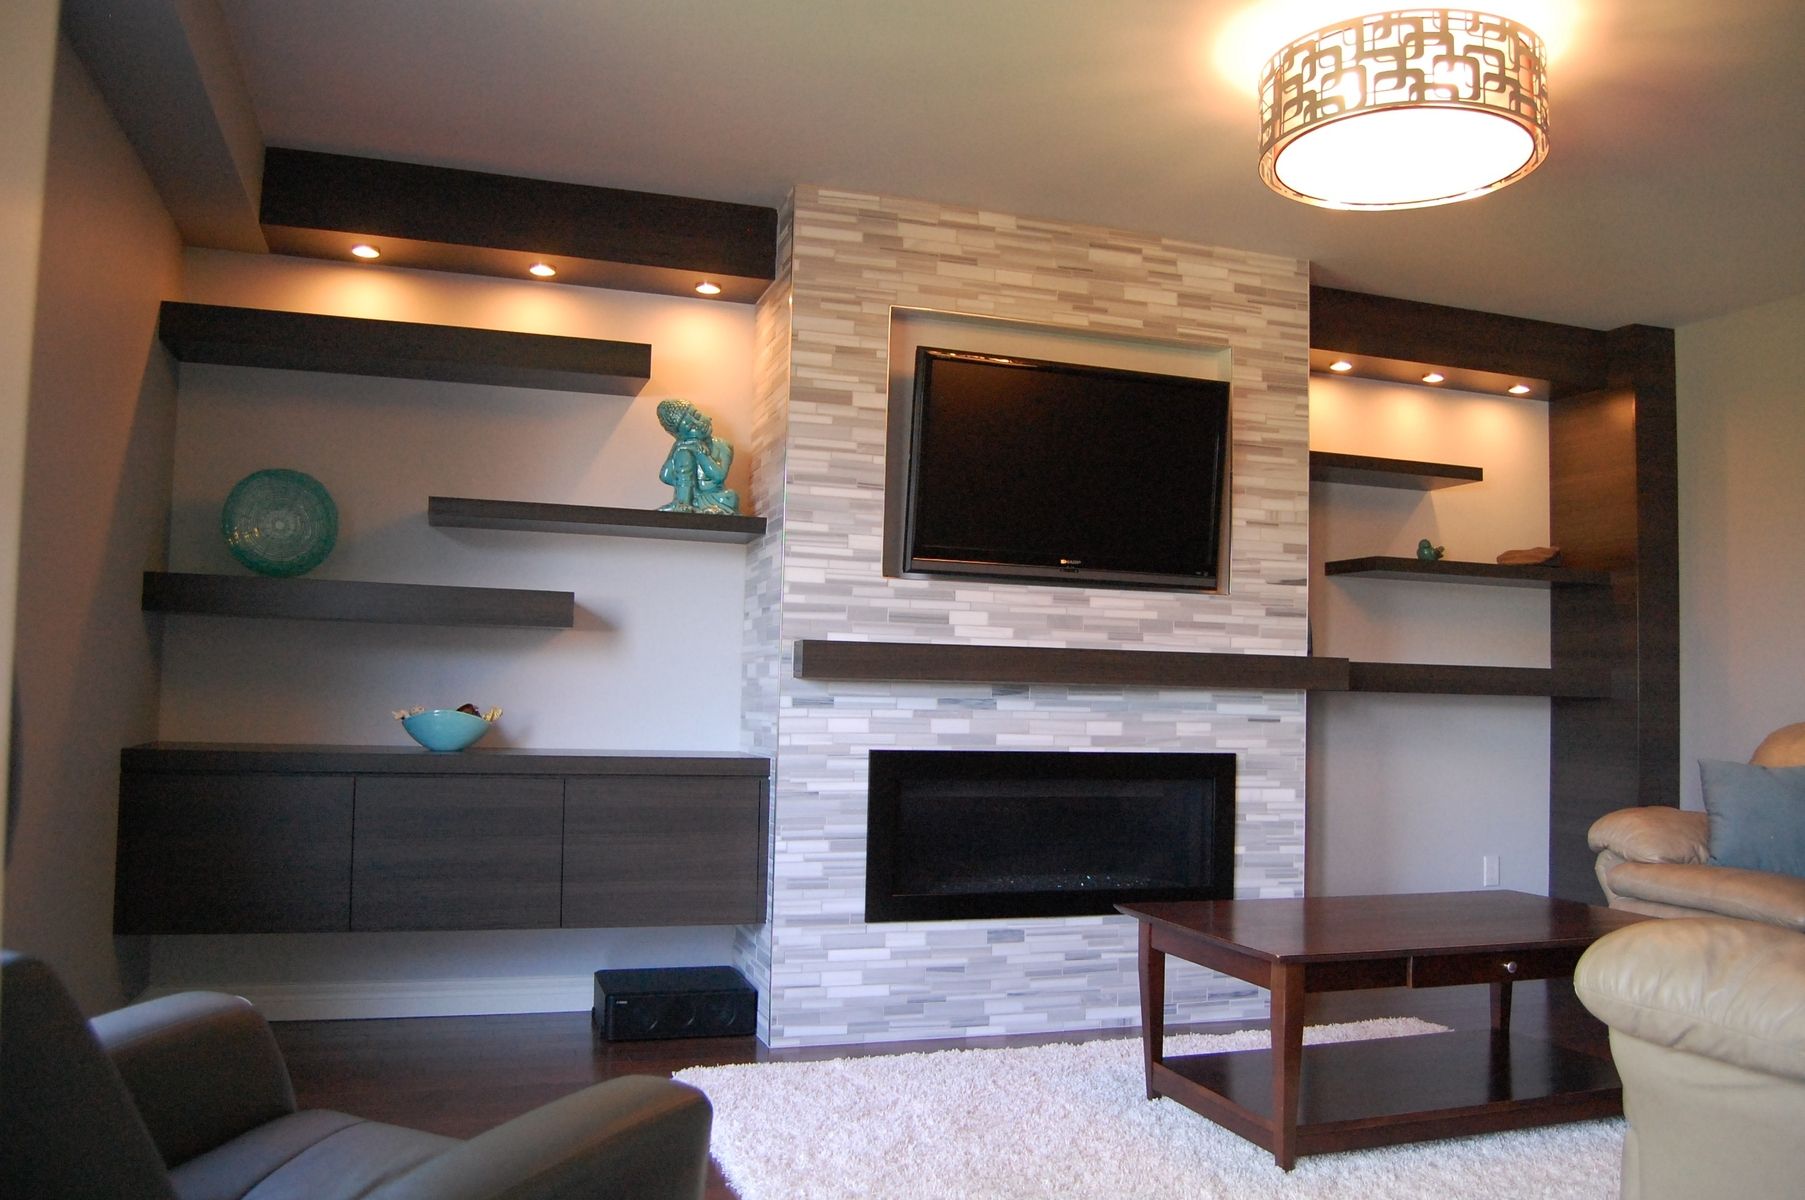 Tv Over Wood Burning Fireplace New Custom Modern Wall Unit Made Pletely From A Printed